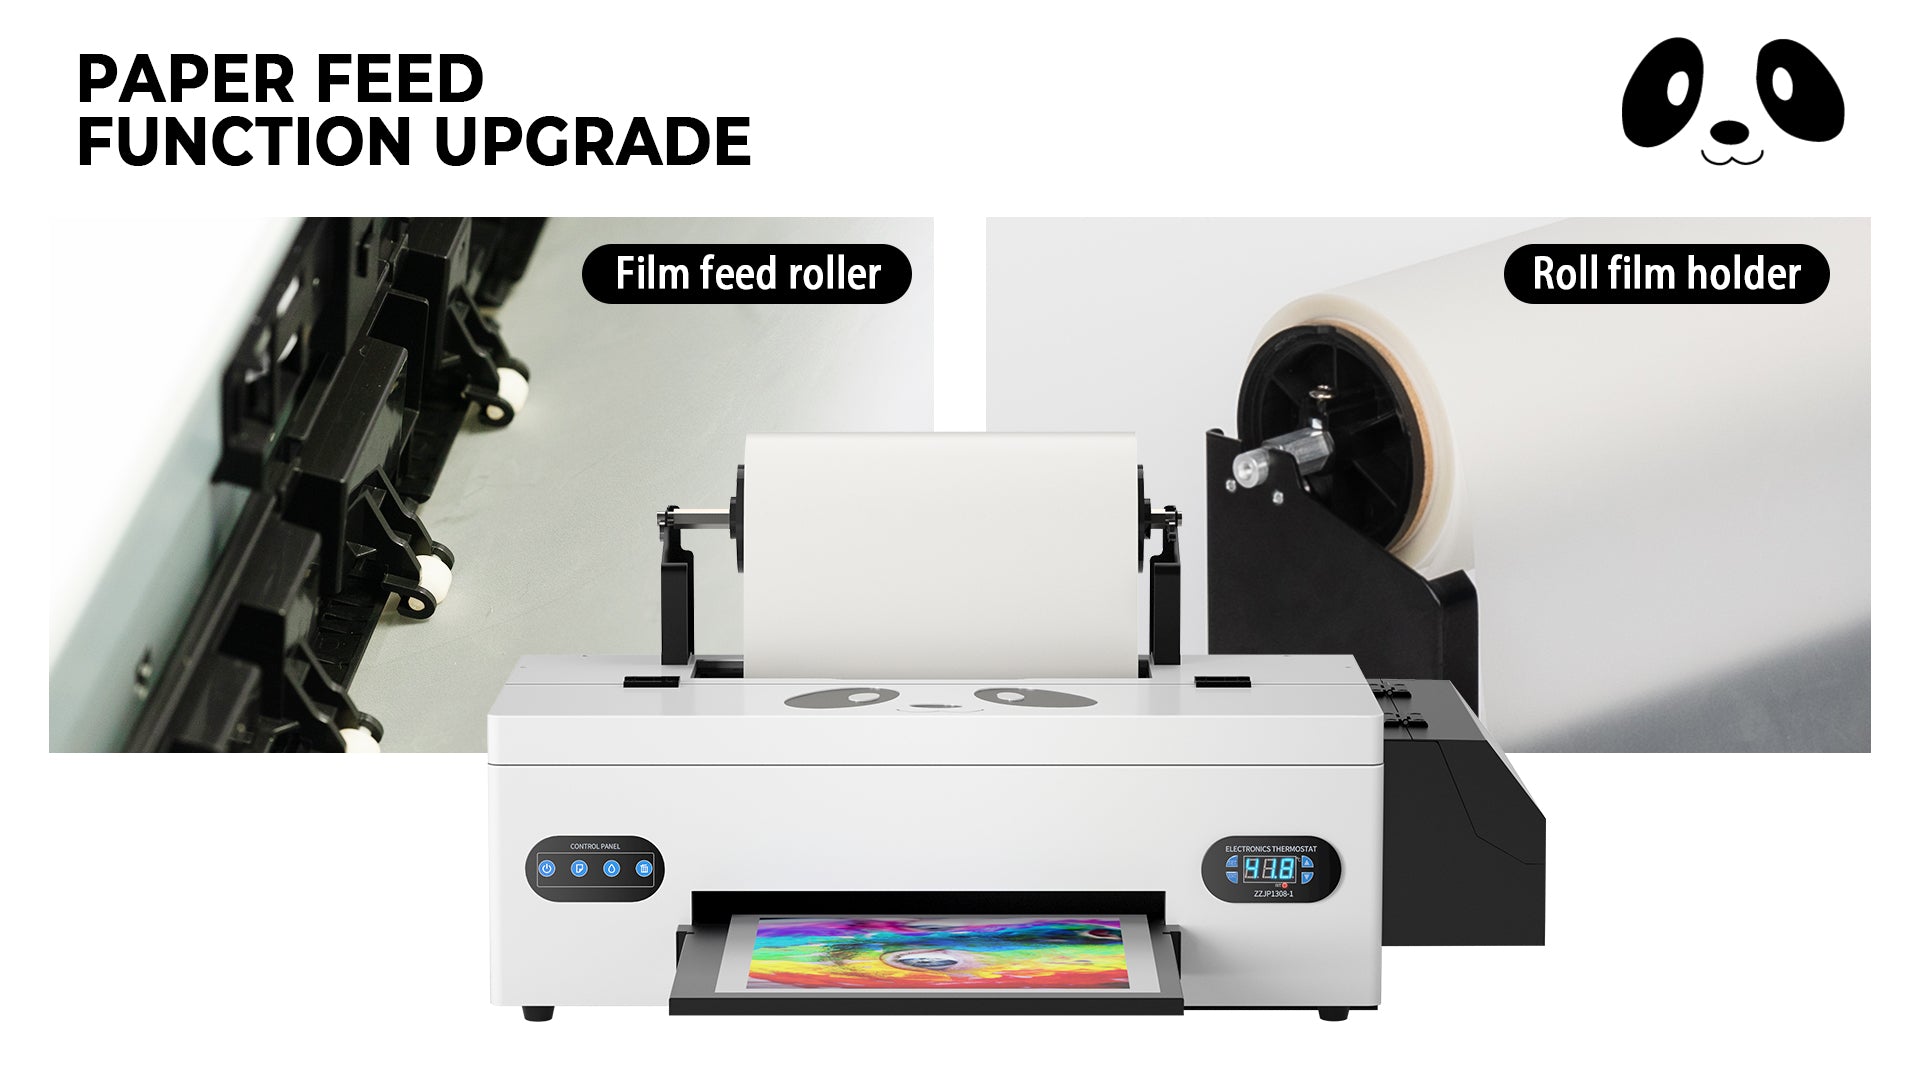 DTF L1800 Transfer Printer with Roll Feeder, Direct — Wide Image Solutions